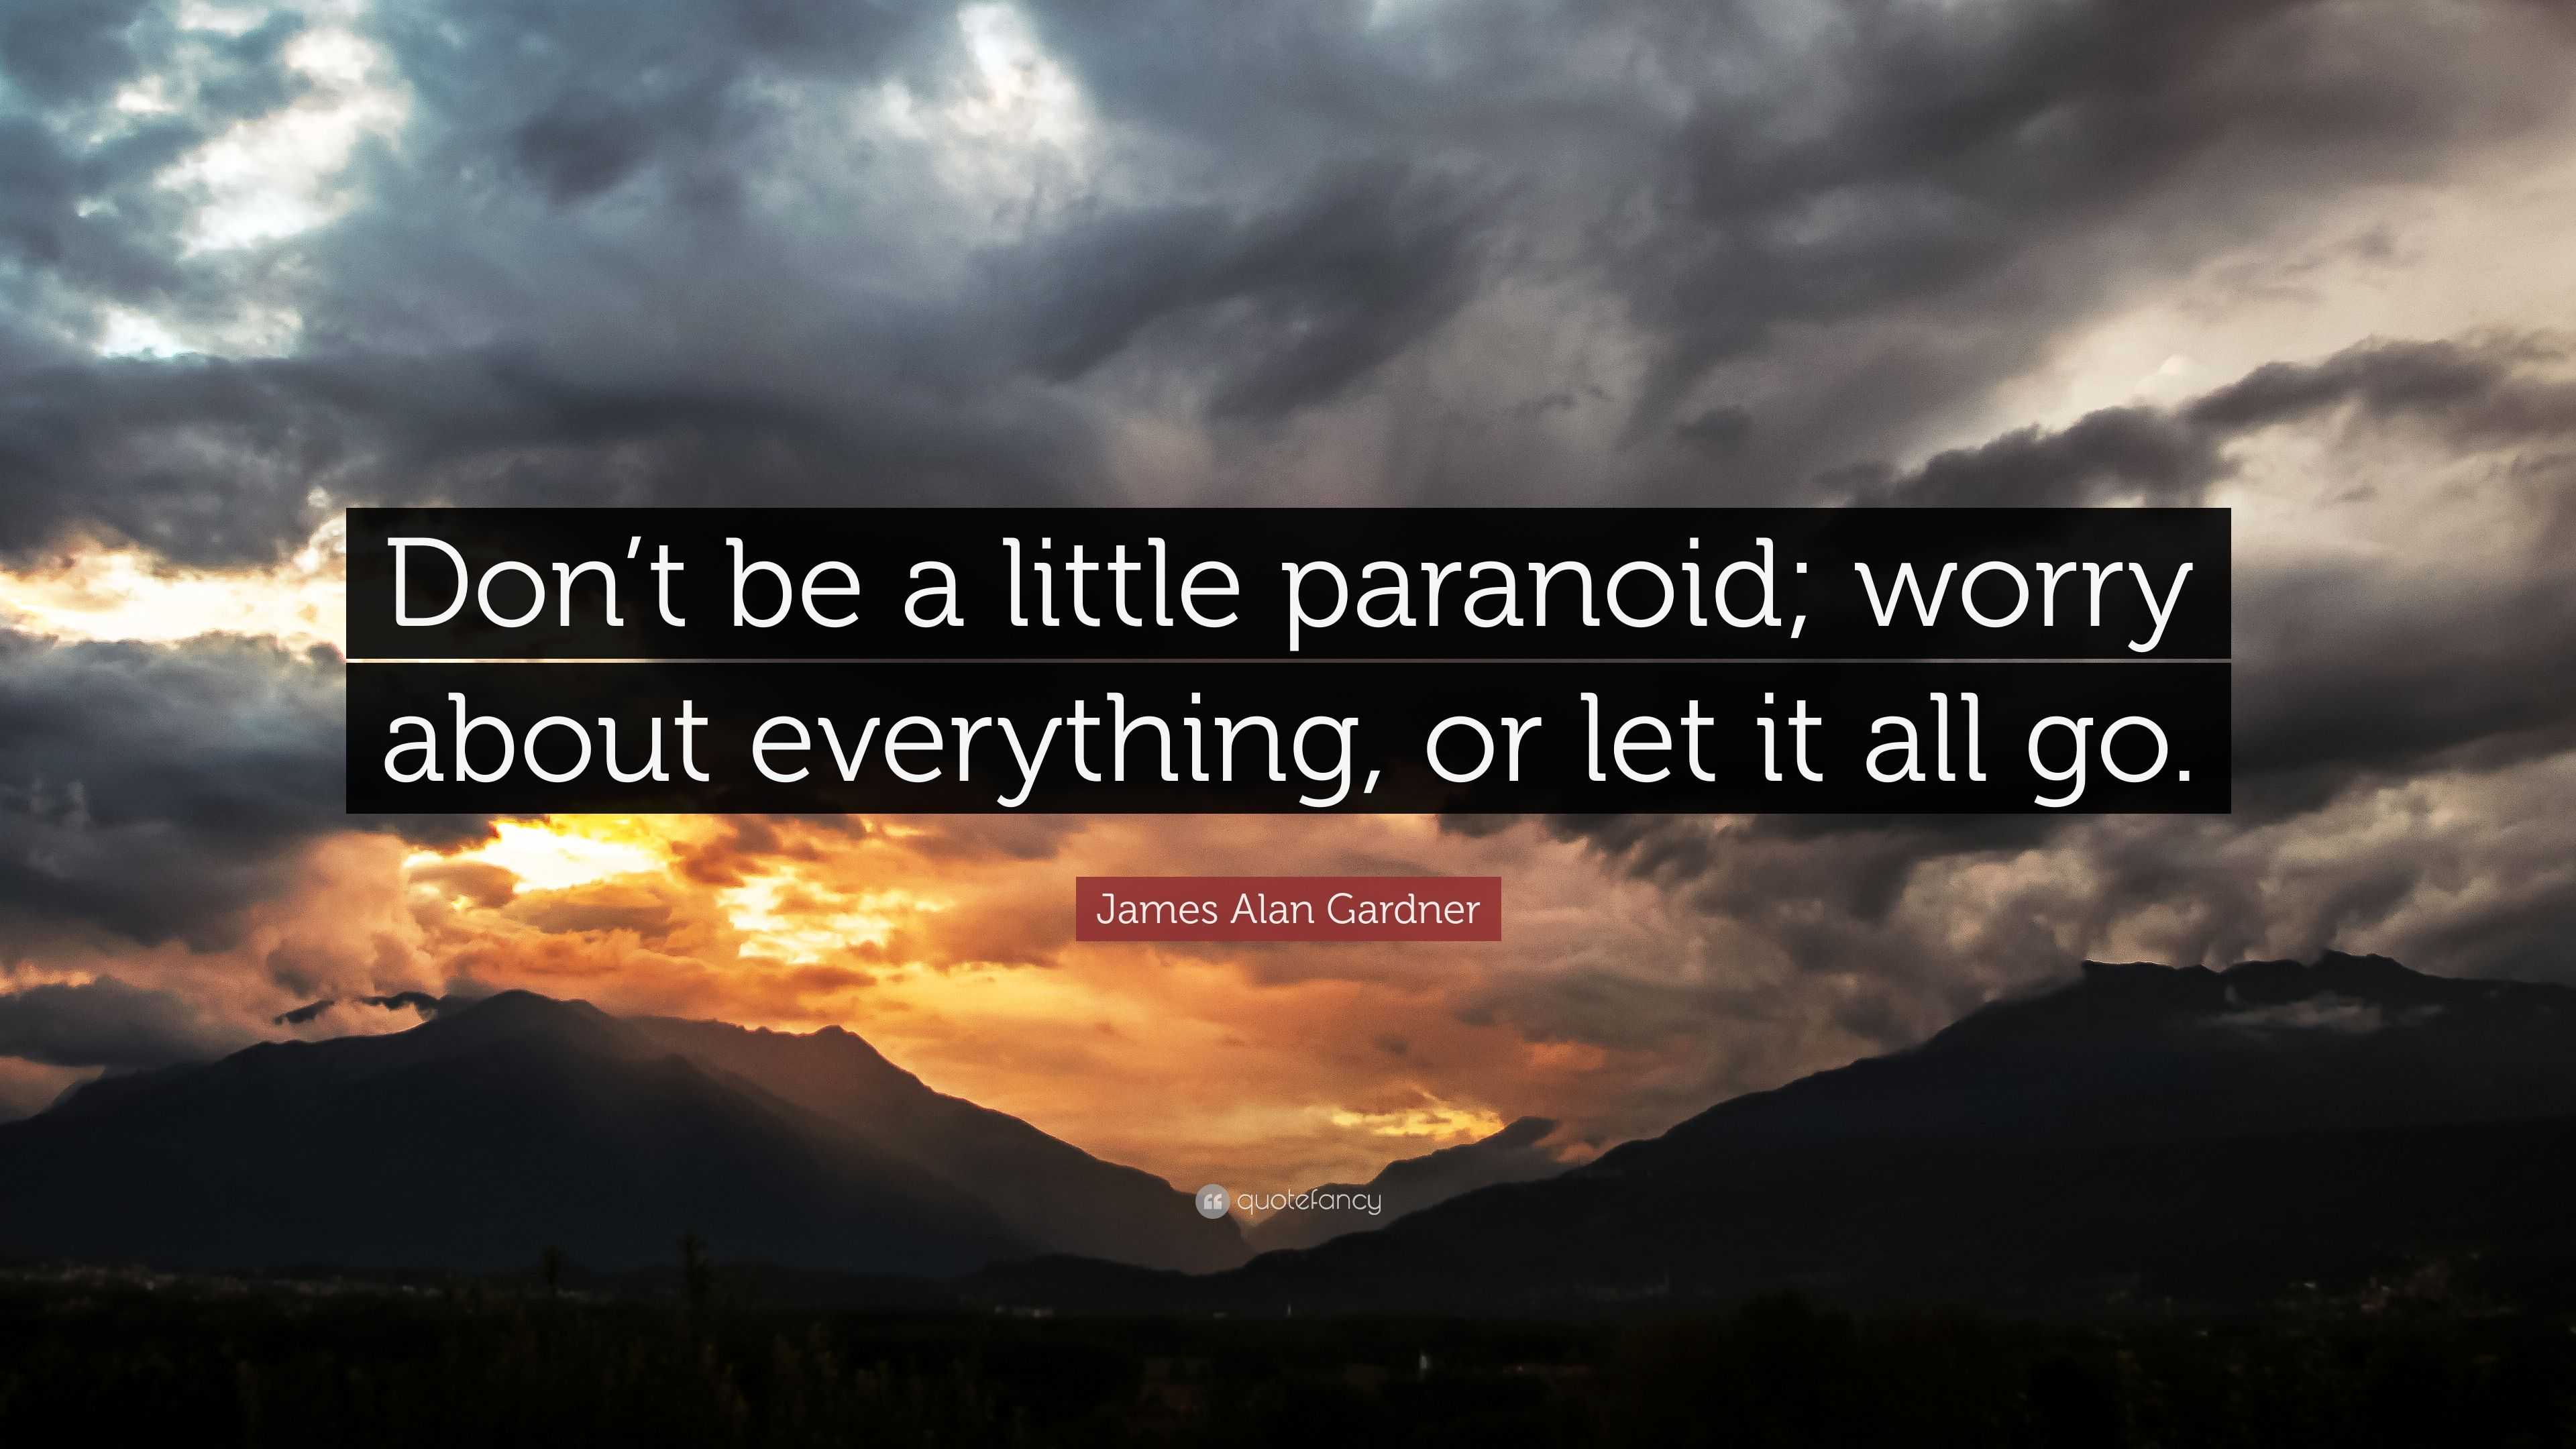 James Alan Gardner Quote: “Don't be a little paranoid; worry about  everything, or let it